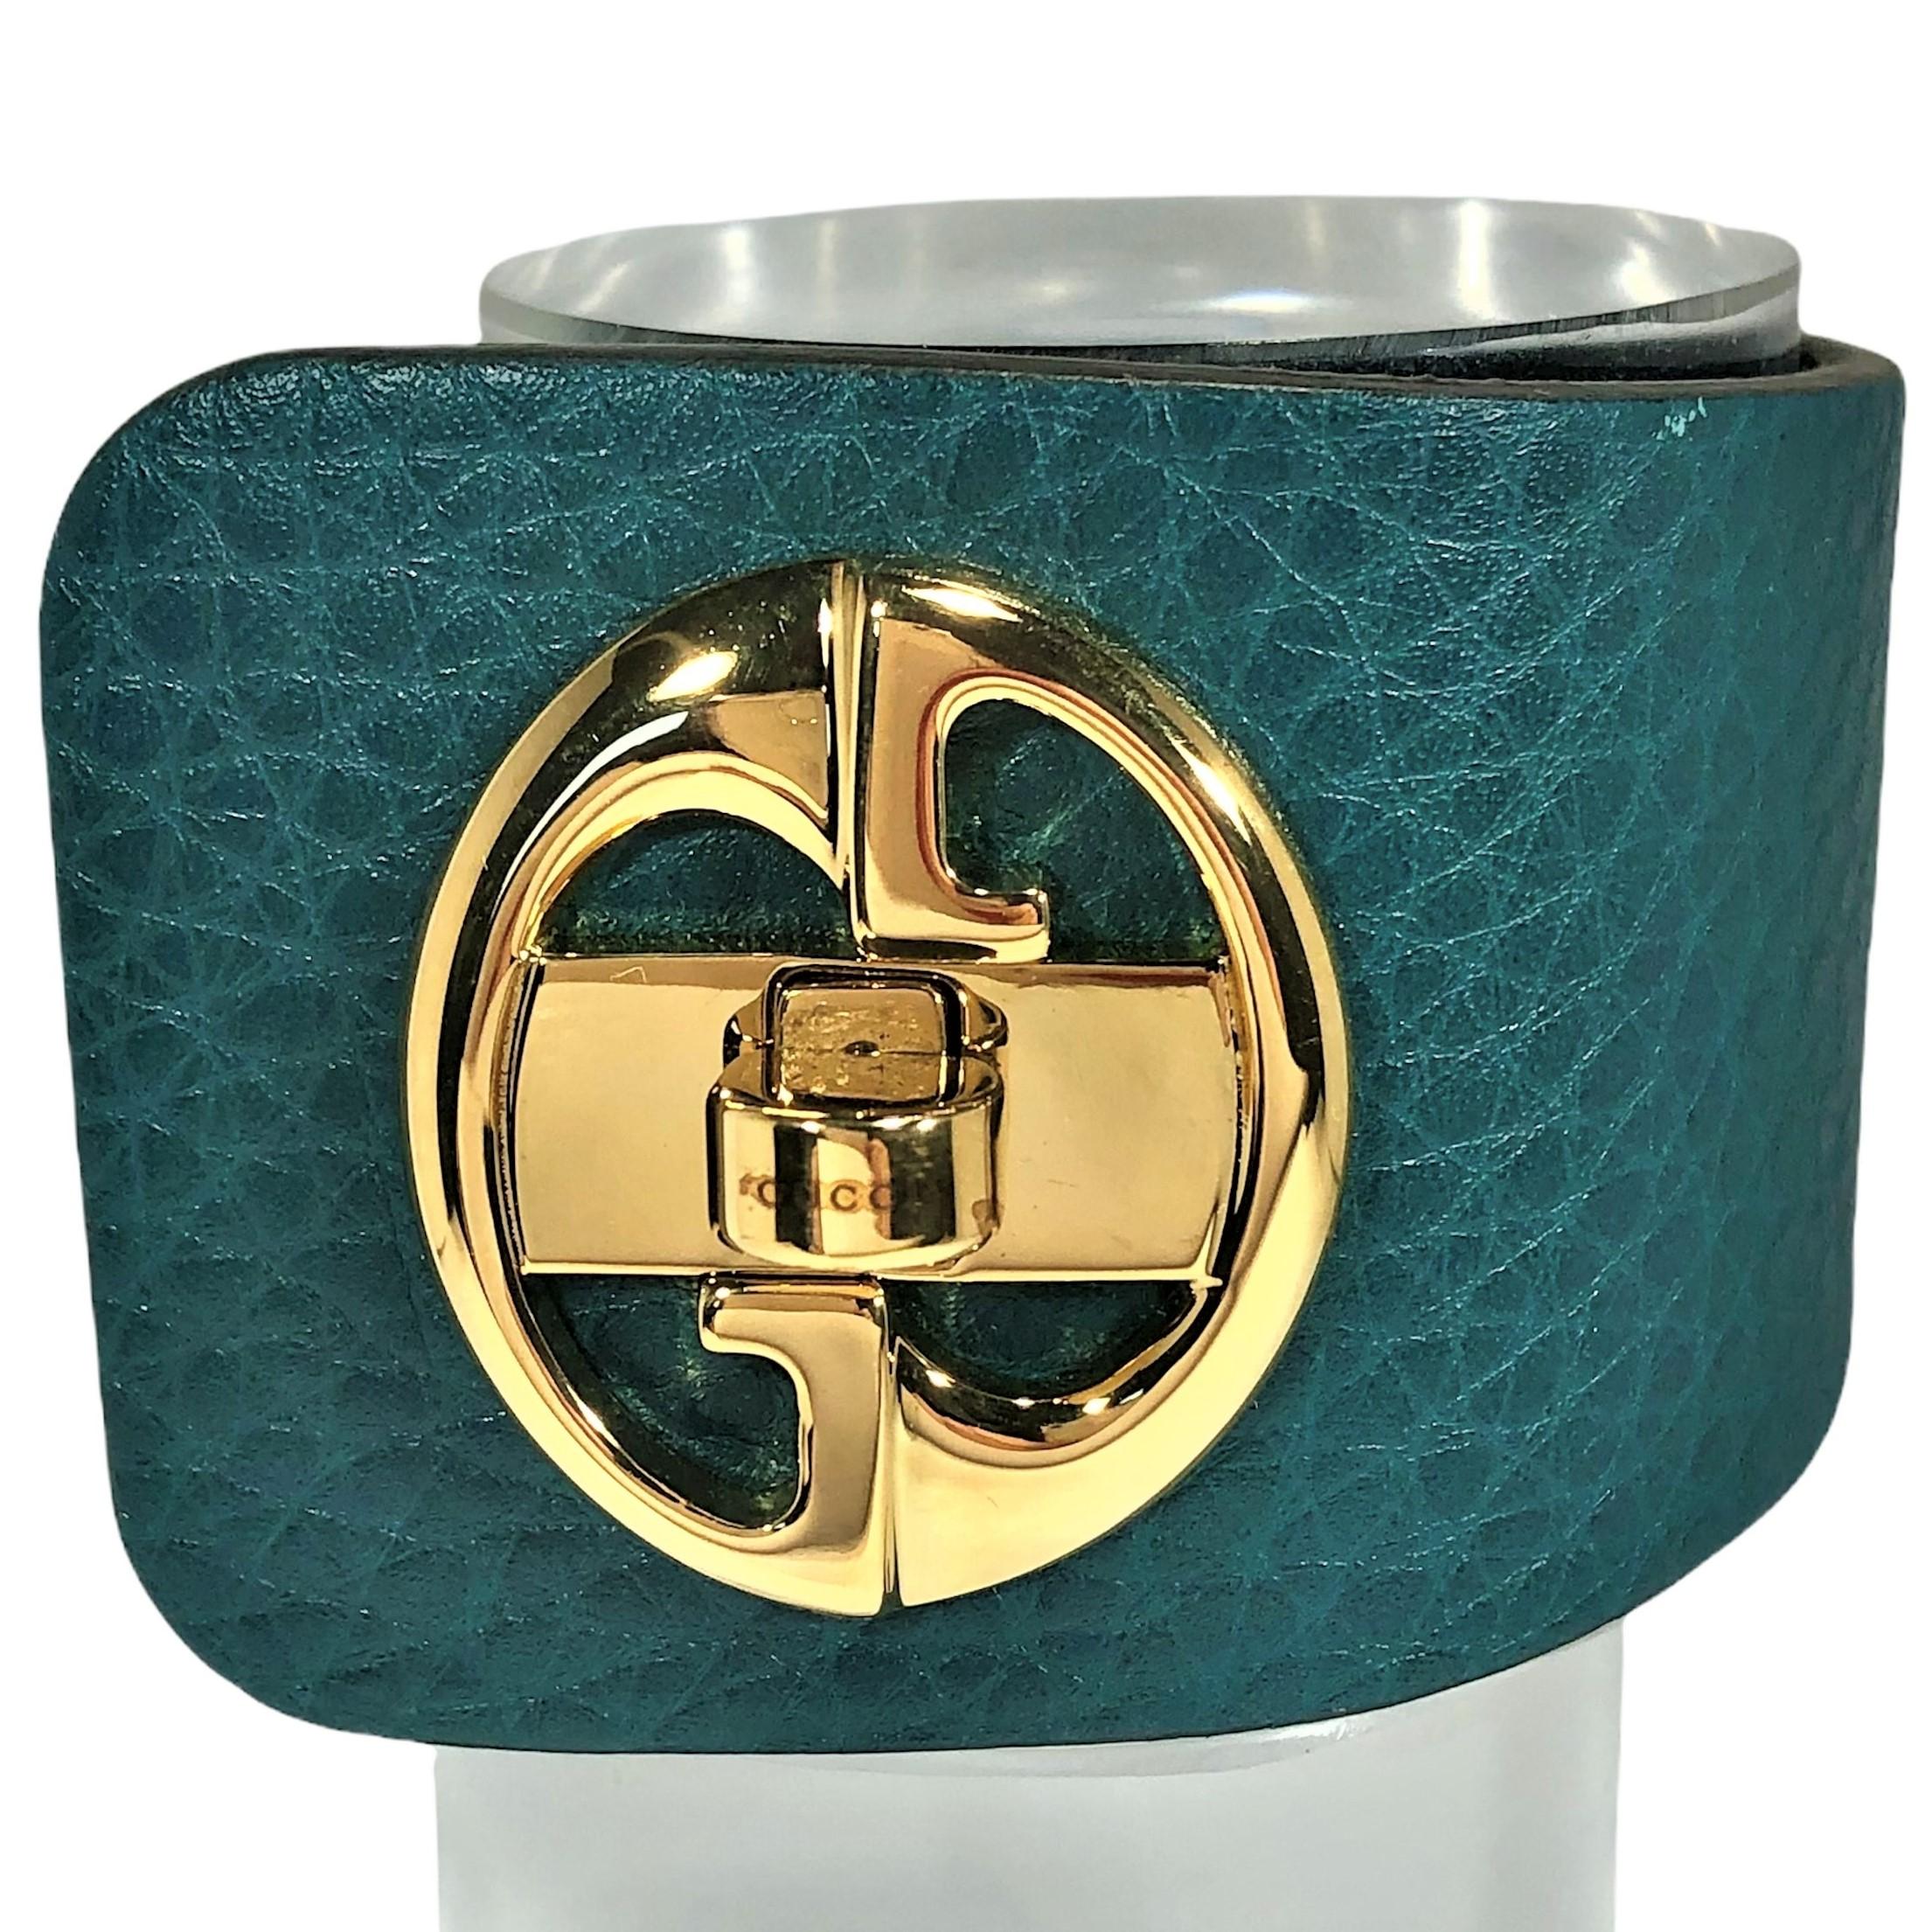 Made in Italy by Gucci, this gold tone turnkey style leather cuff bracelet has never been worn. The  bracelet flares from just under 2 inches 
(1 15/16 inches) at the widest point down to 1 1/2 inches at the back. The turnkey clasp makes this